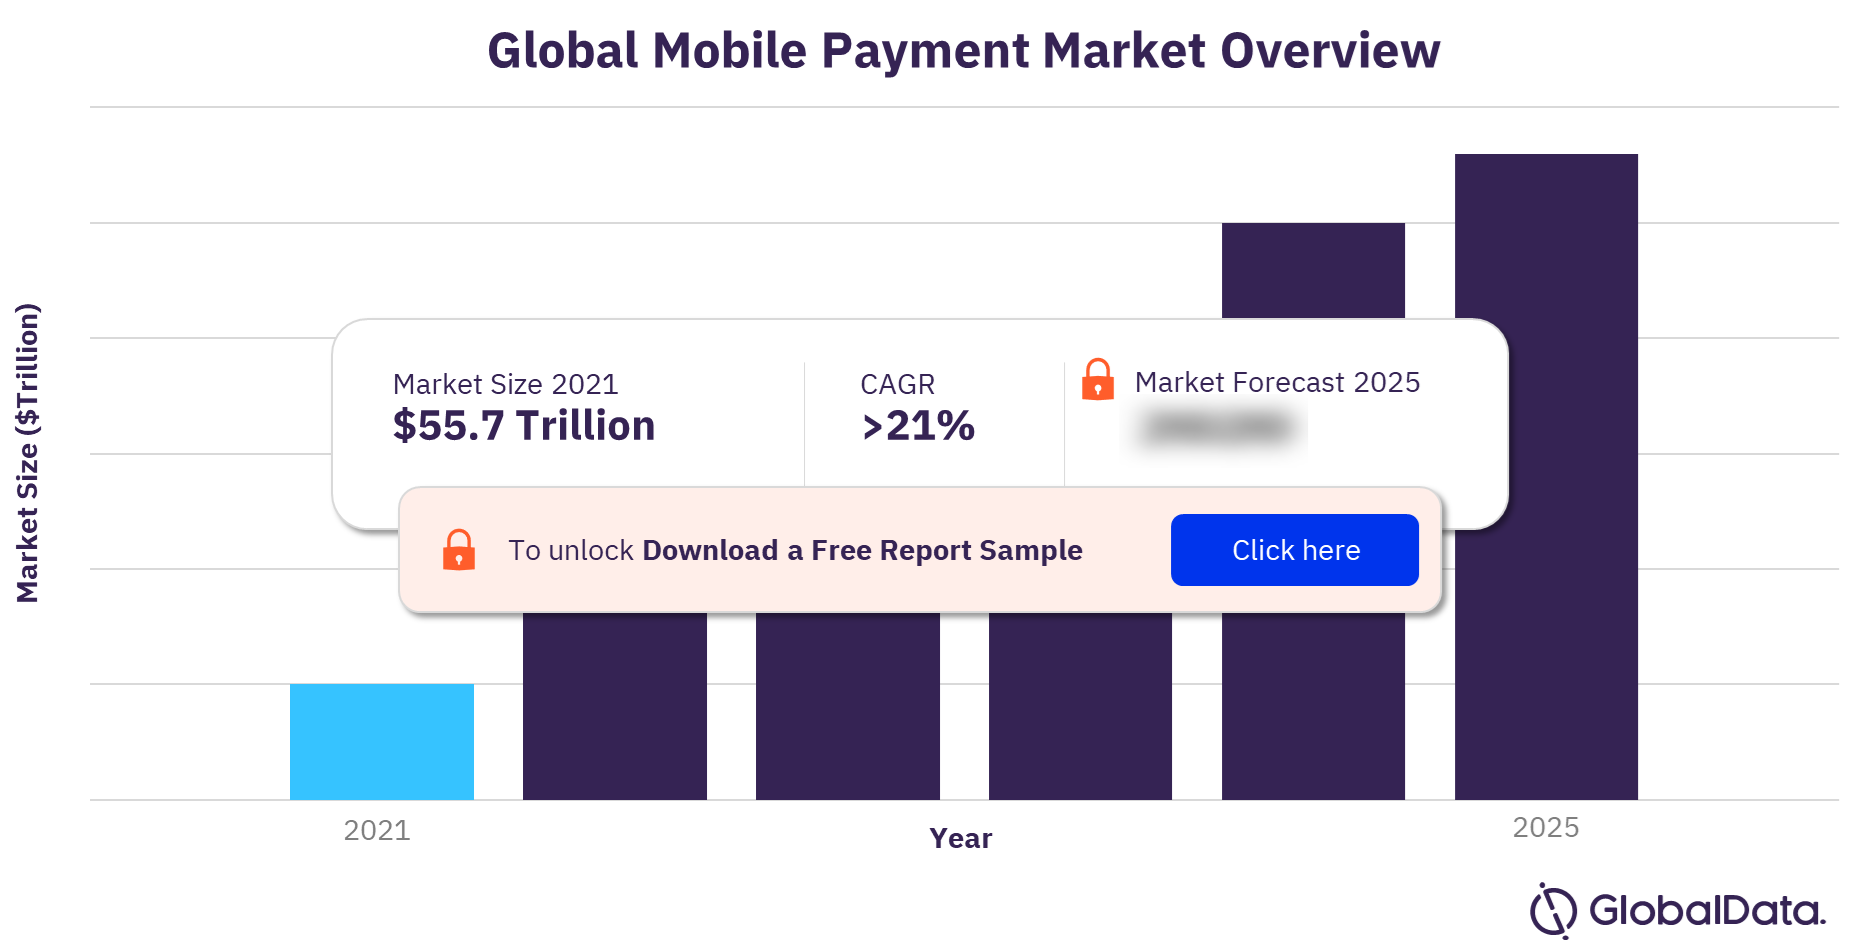 Global Mobile Payment Market Overview